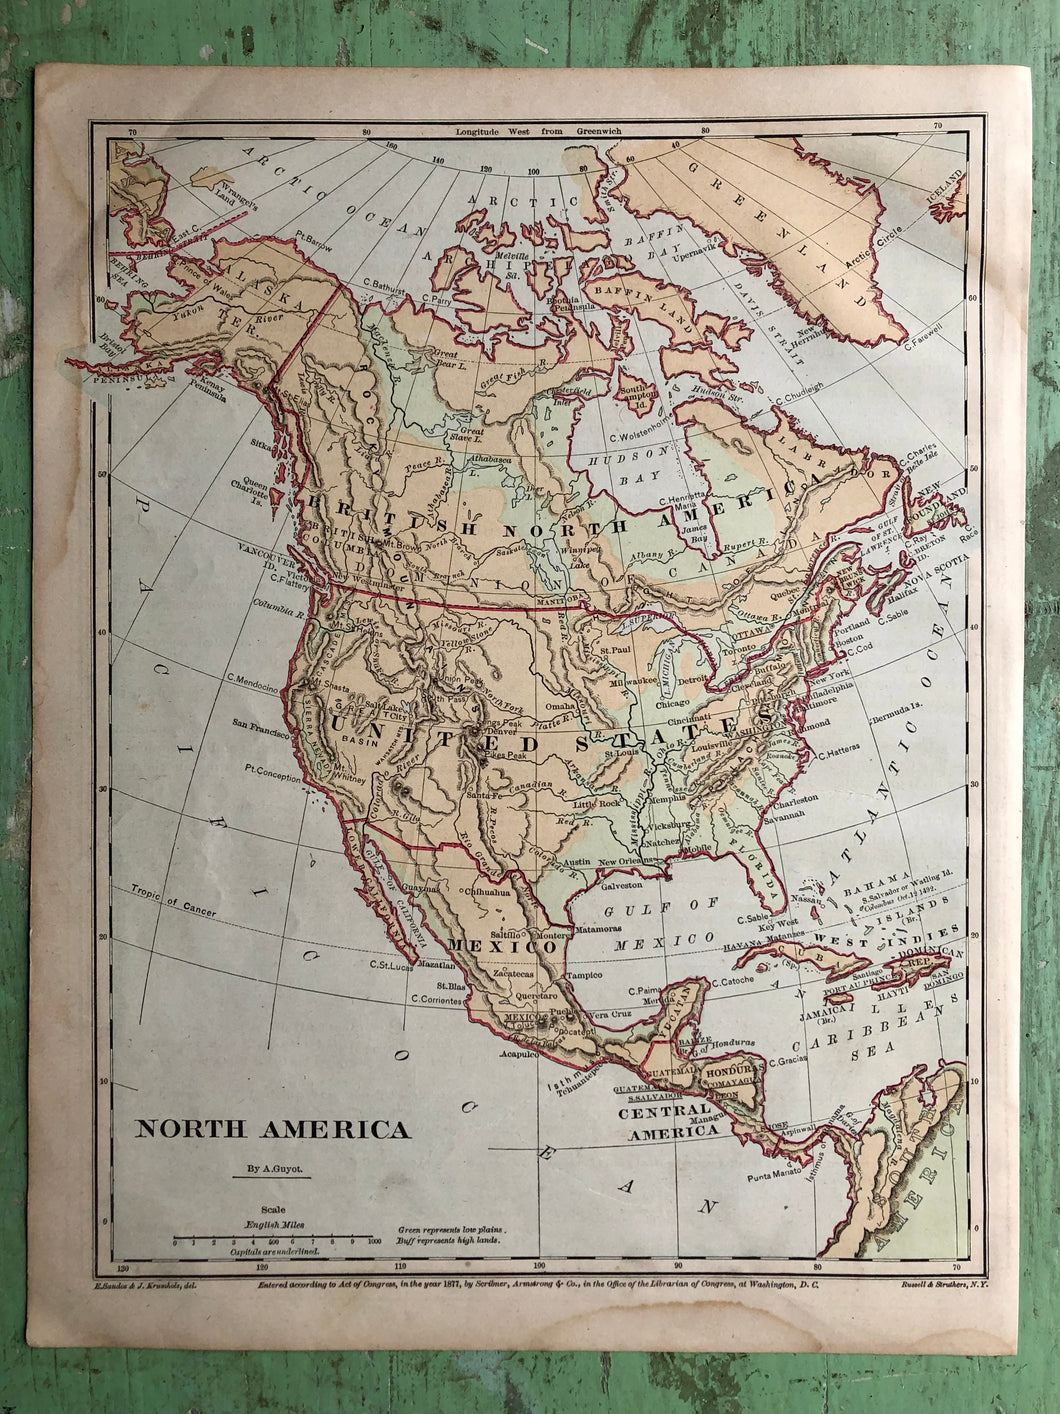 Map of North America from Guyot's New Intermediate Geography